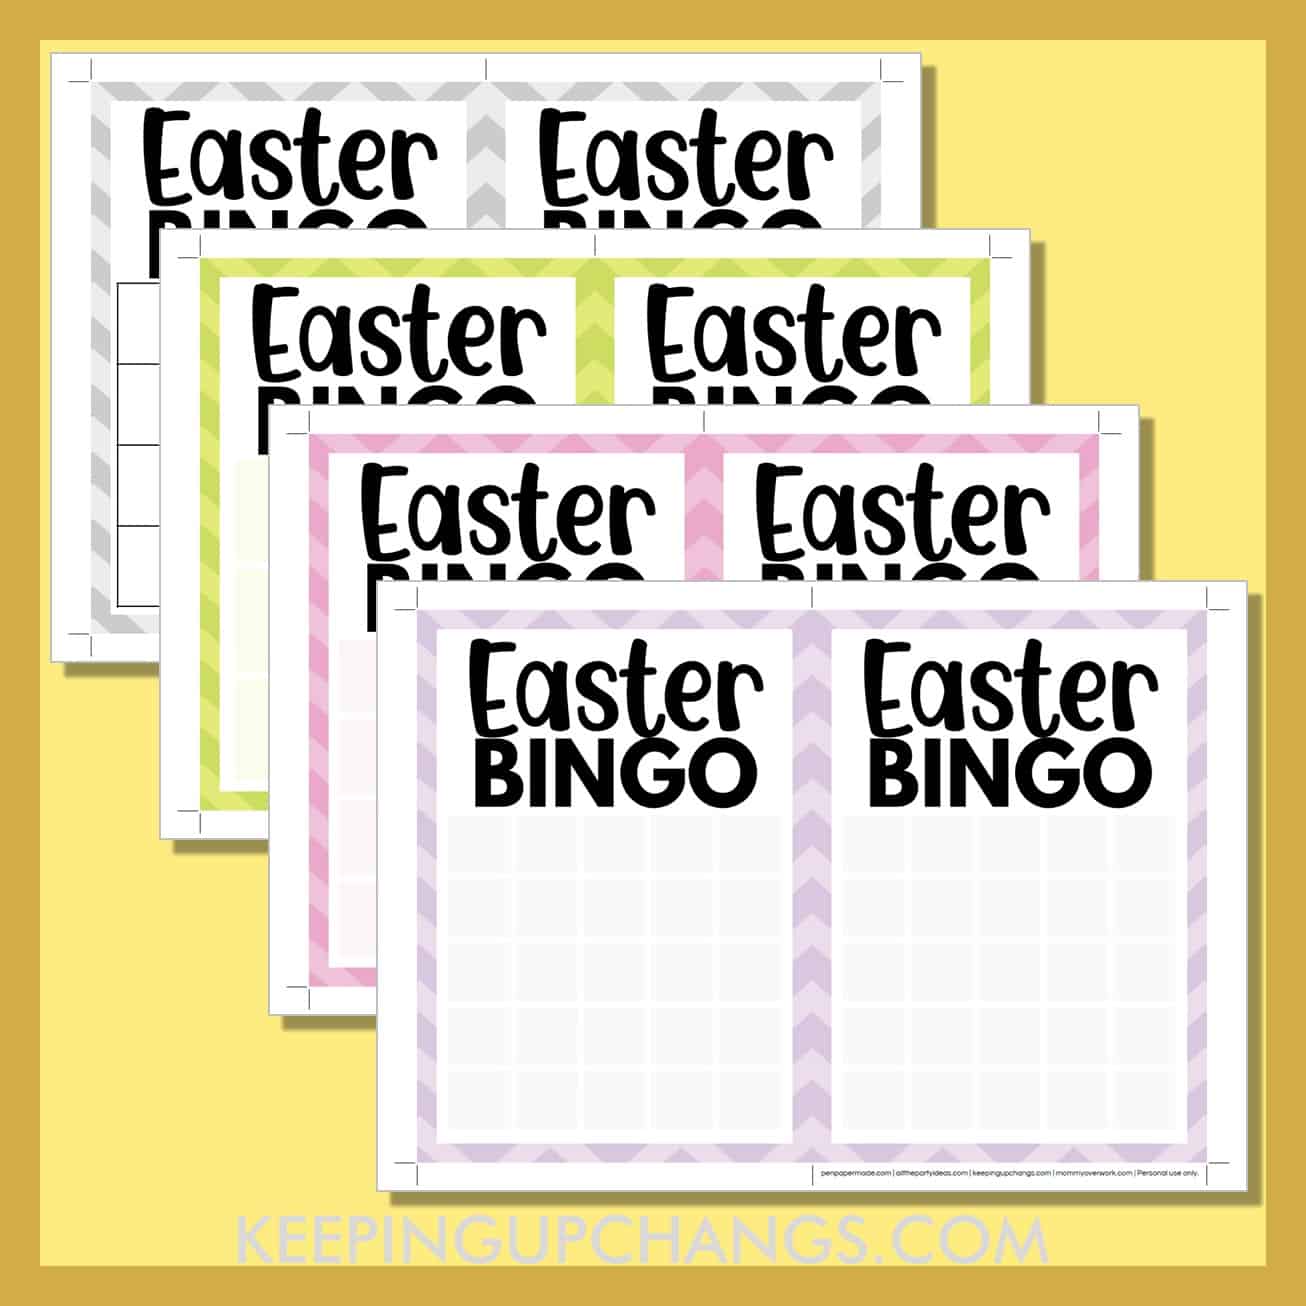 free blank easter bingo card printable templates in 3x3, 4x4 and 5x5 grids.